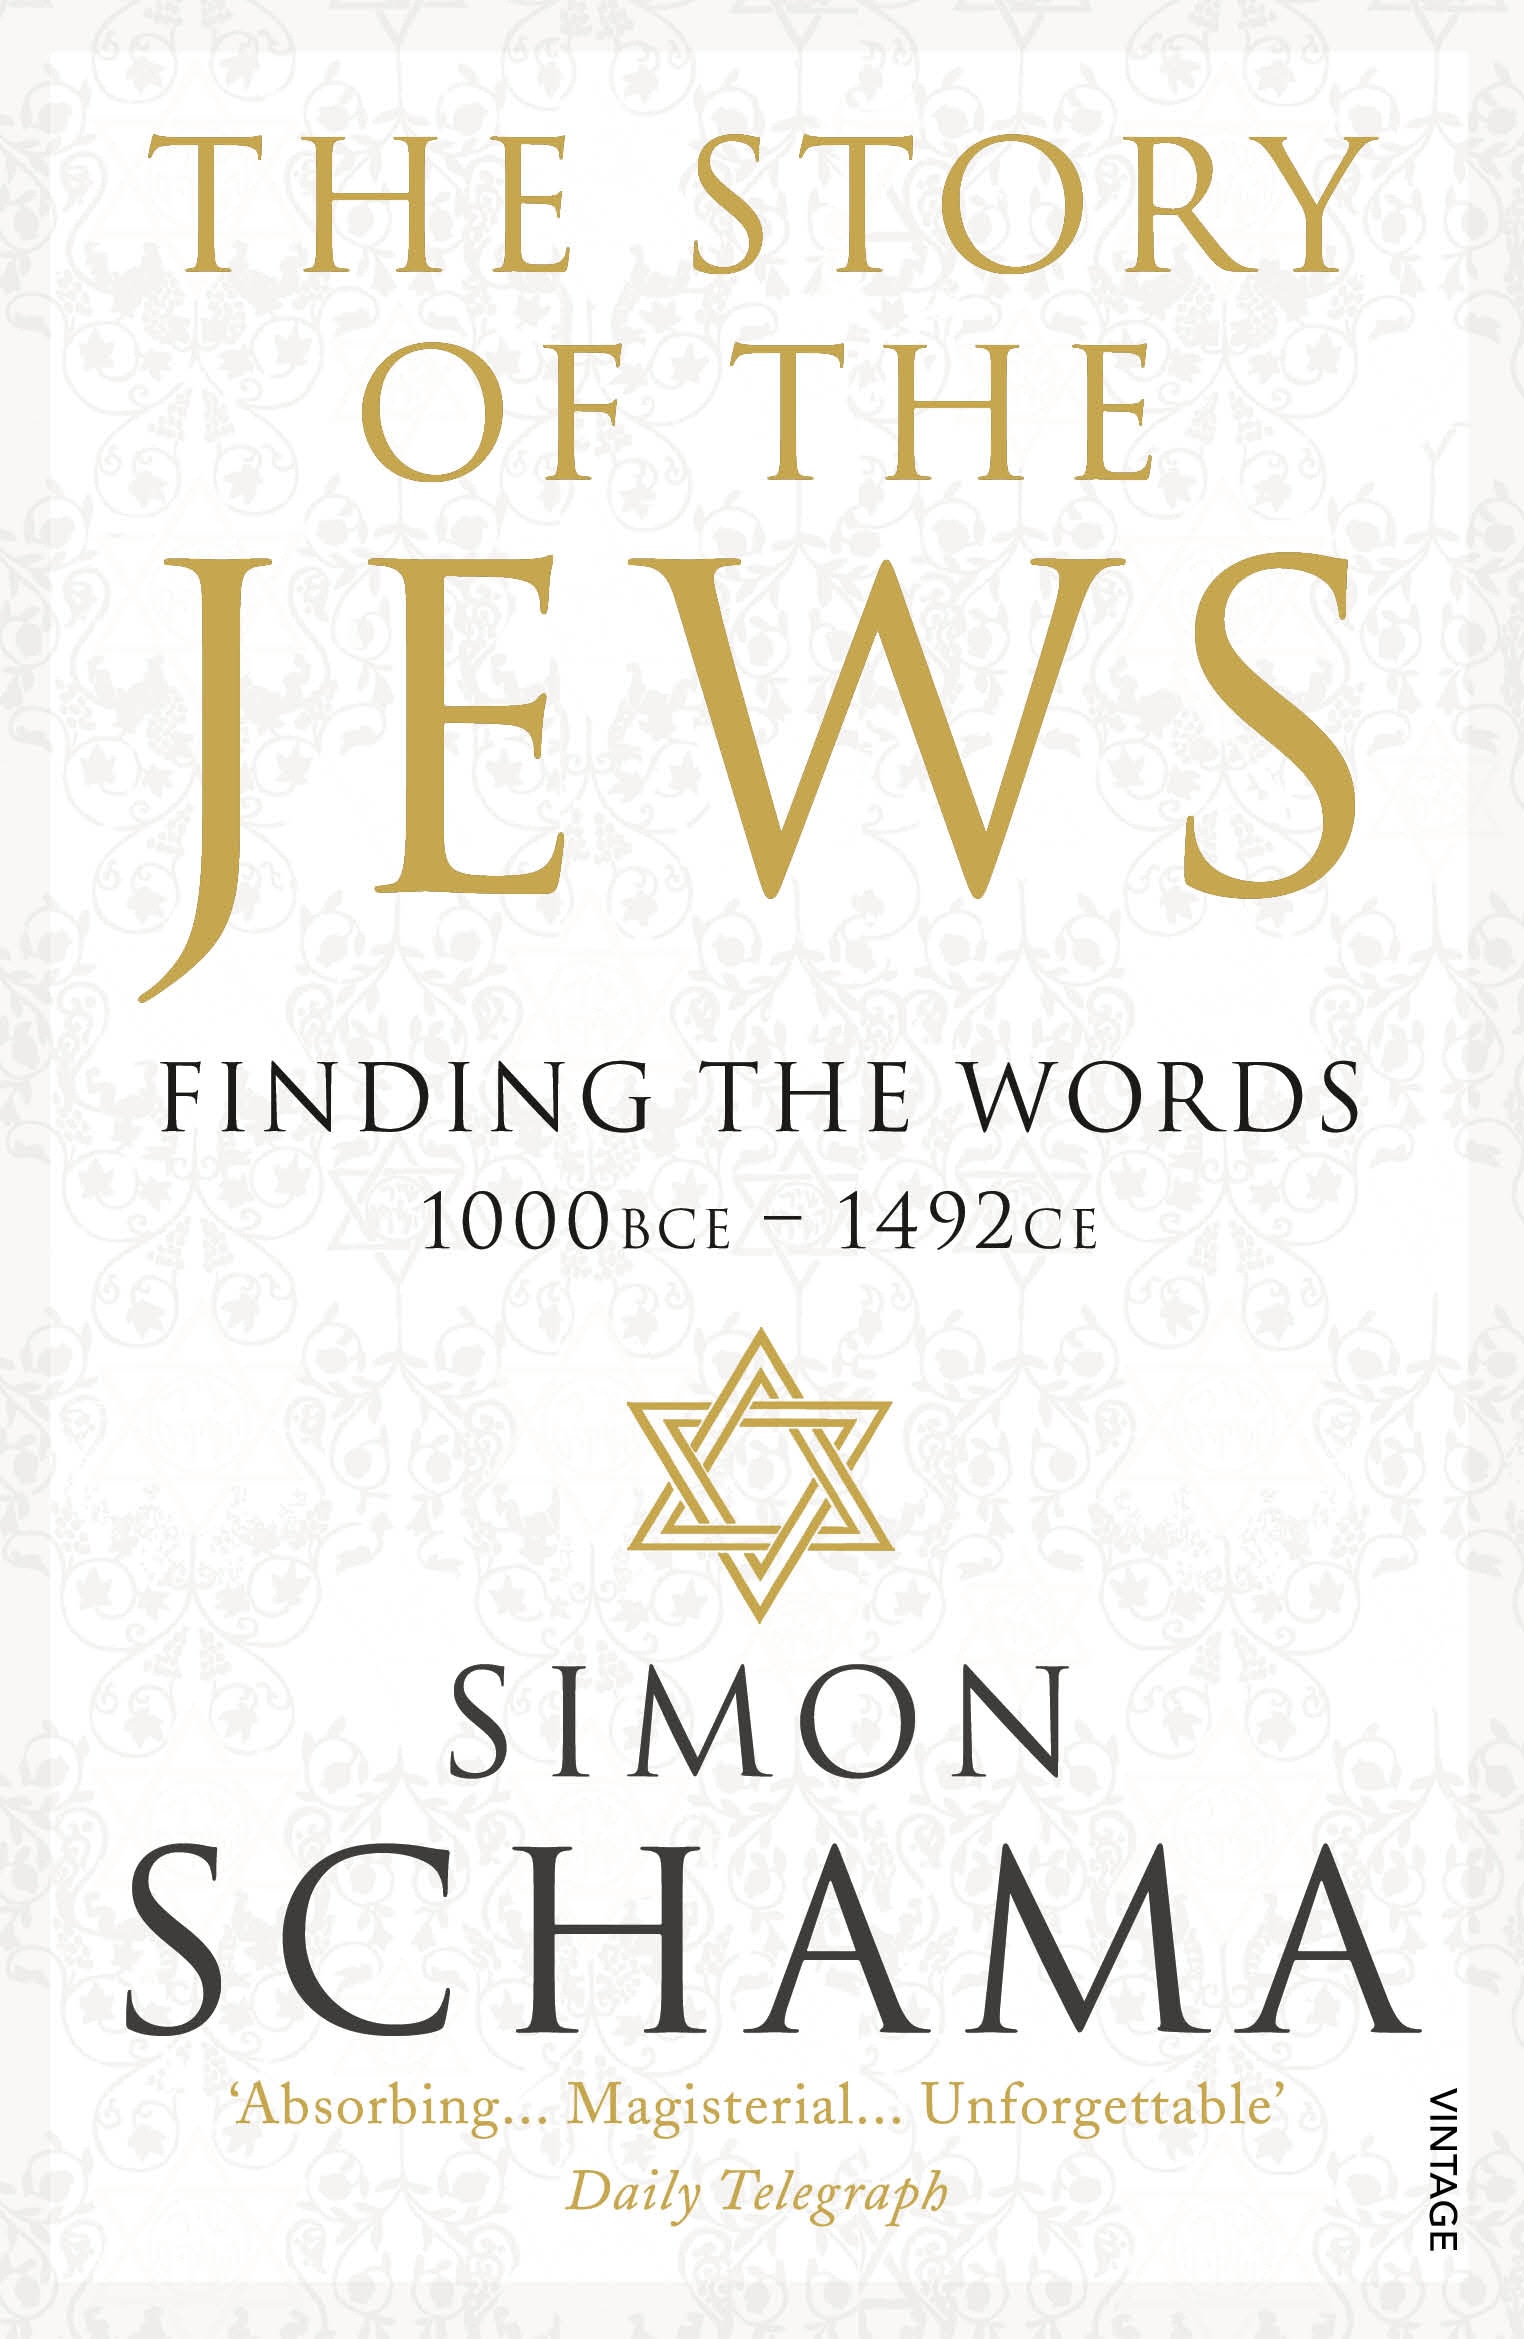 Book “The Story of the Jews” by Simon Schama — September 11, 2014